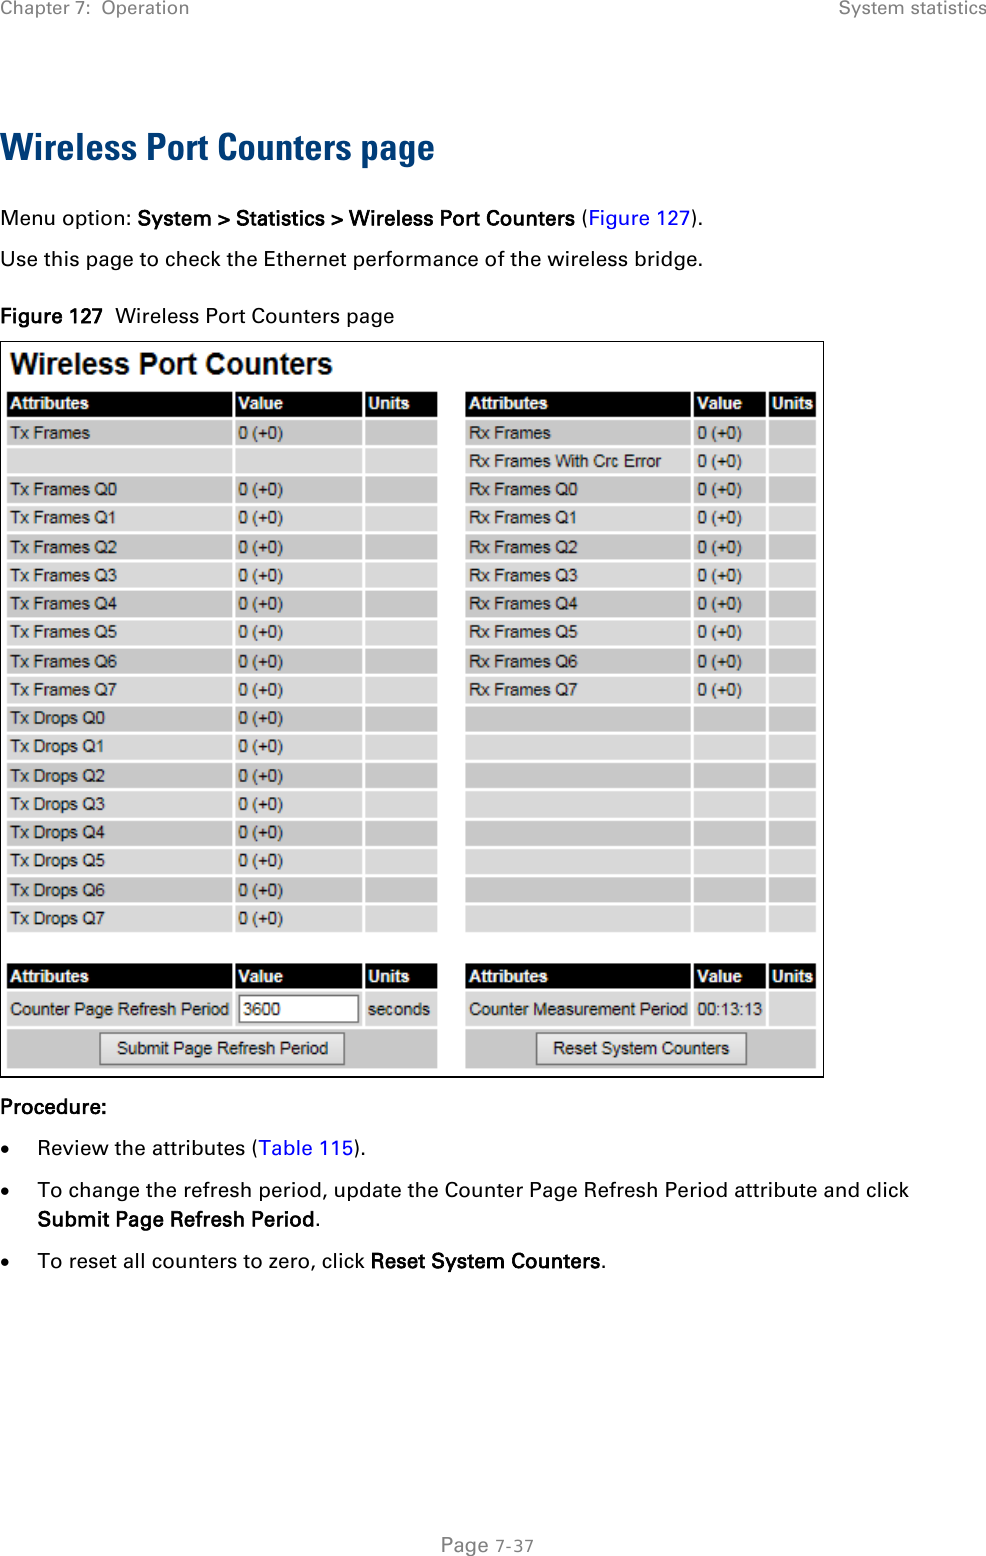 Chapter 7:  Operation System statistics  Wireless Port Counters page Menu option: System &gt; Statistics &gt; Wireless Port Counters (Figure 127). Use this page to check the Ethernet performance of the wireless bridge. Figure 127  Wireless Port Counters page  Procedure: • Review the attributes (Table 115). • To change the refresh period, update the Counter Page Refresh Period attribute and click Submit Page Refresh Period. • To reset all counters to zero, click Reset System Counters.  Page 7-37 